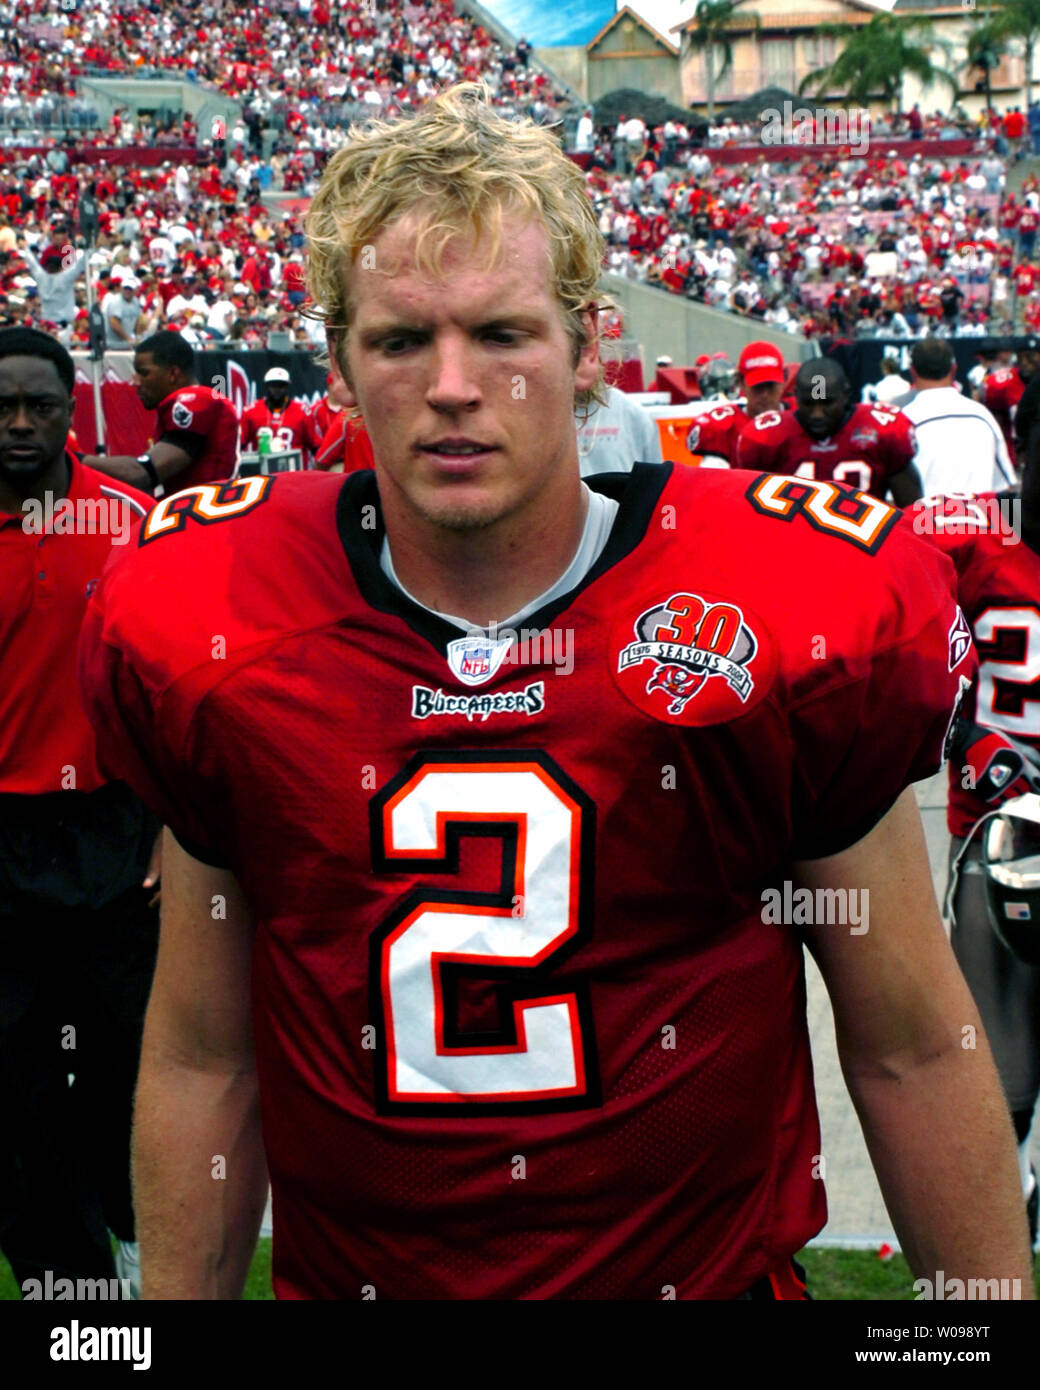 Tampa Bay Buccaneers' quarterback Chris Simms heads for the locker room at halftime during game against the New Orleans Saints at Raymond James Stadium January 1, 2006 in Tampa, Fl. The Buccaneers beat the Saints 27-13 and are NFC South Division Champions.  (UPI Photo/Cathy Kapulka) Stock Photo